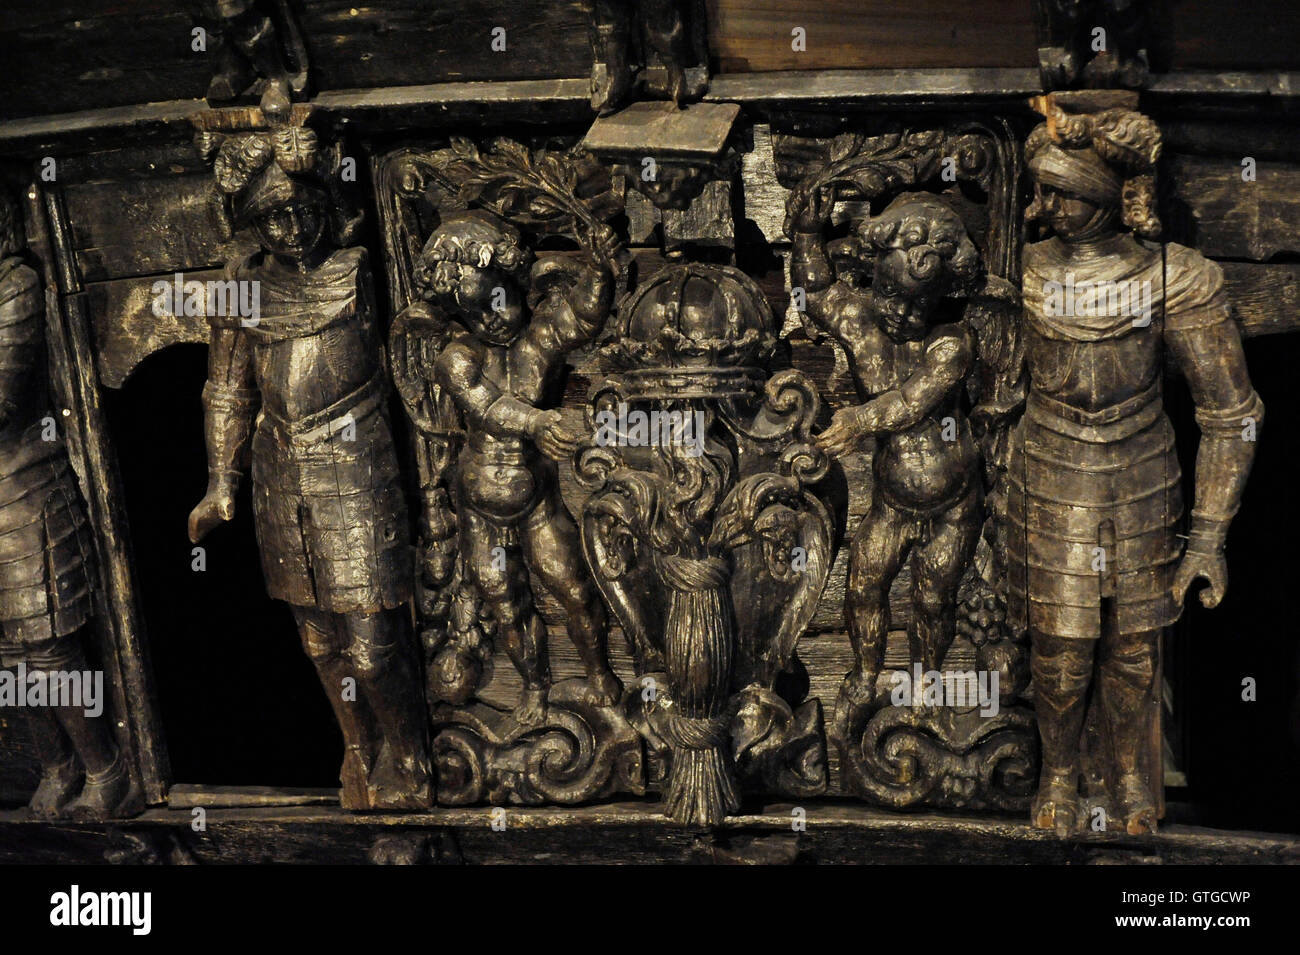 Warship Vasa. Built 1626-1628. Detail of stern. Lions holding the coat of arms of Sweden. Vasa Museum. Stockholm. Sweden. Stock Photo